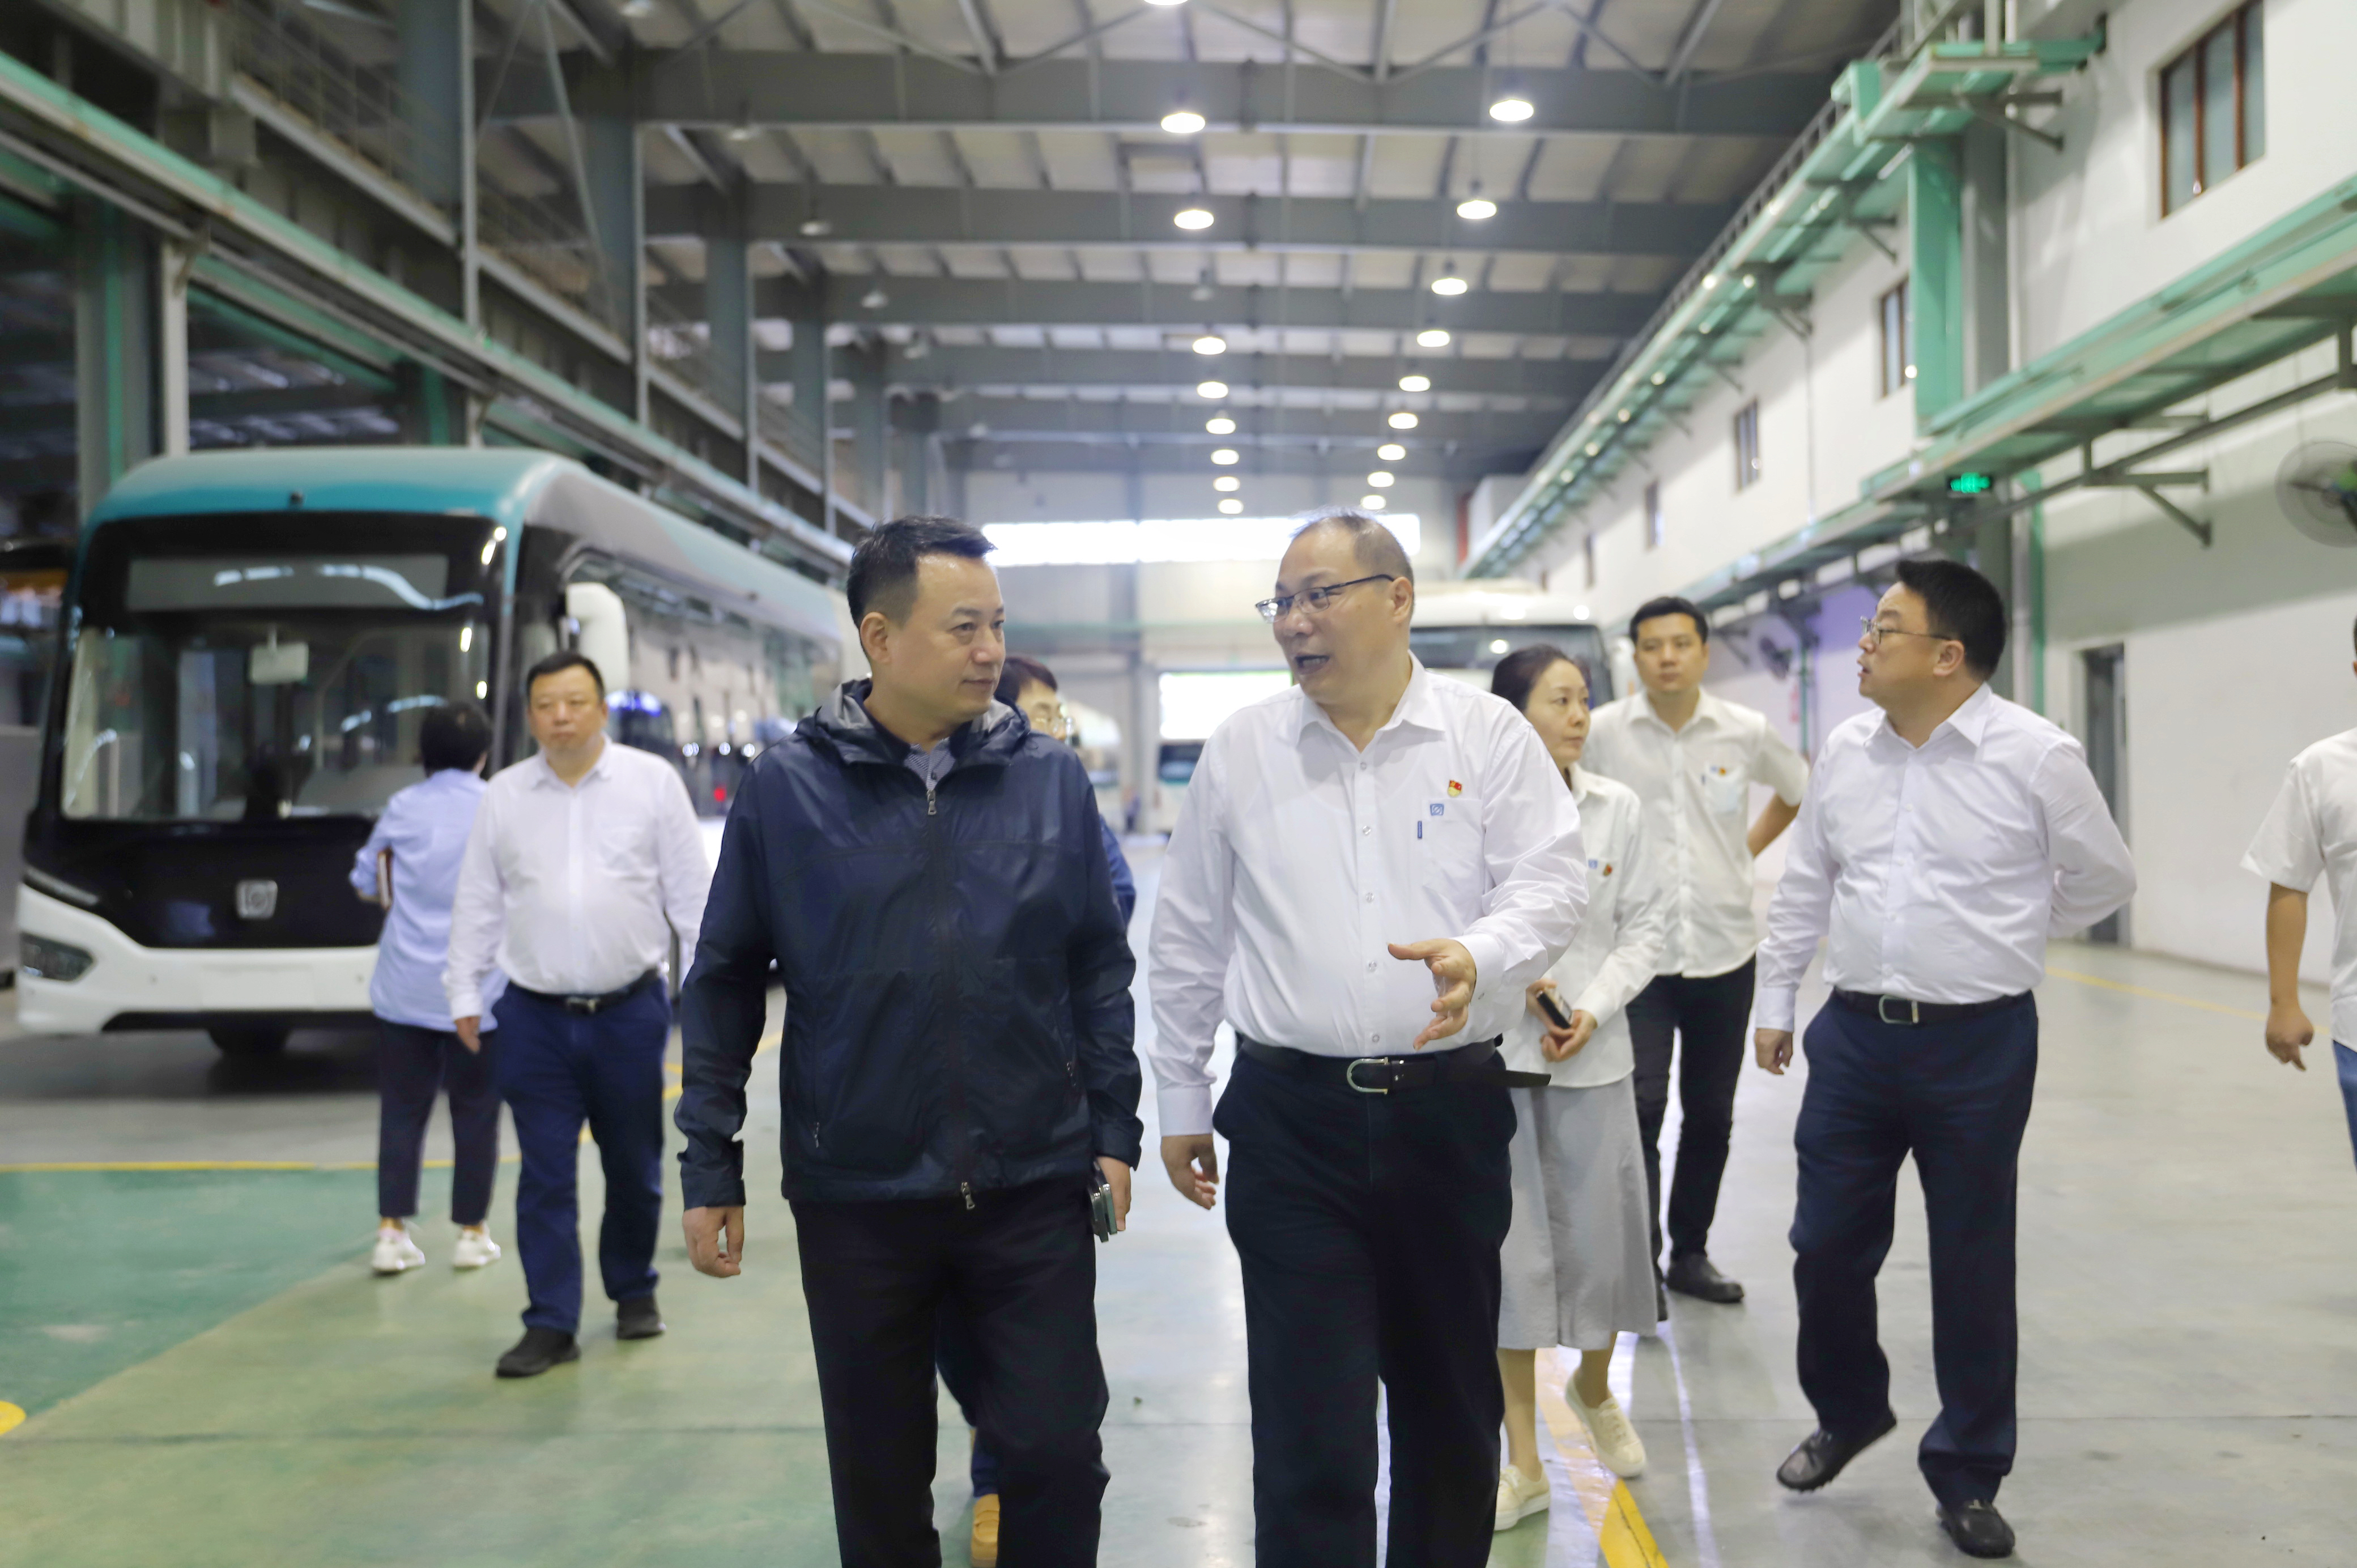 Leaders from the Shanghai Municipal Road Transport Administrative Bureau Pay a Research Visit to SUNWIN